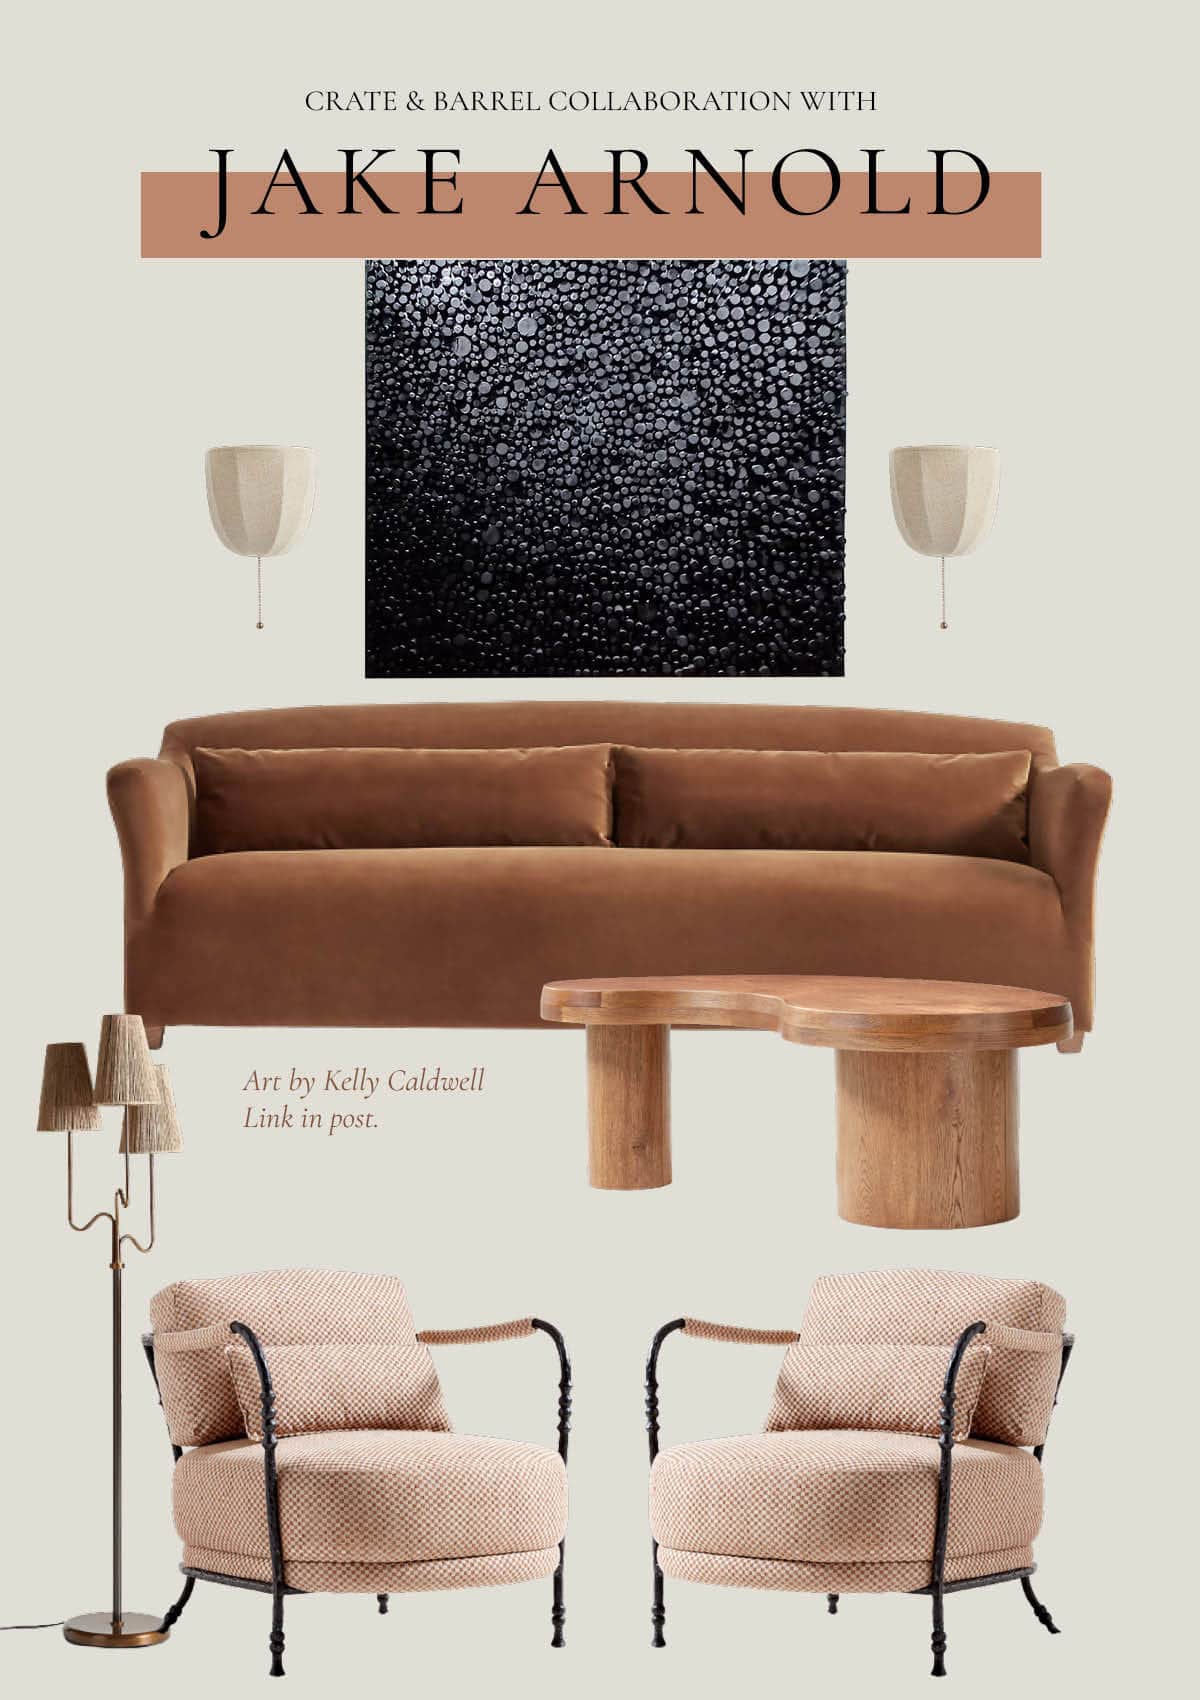 Gorgeous modern eclectic living room design mood board using the new Crate & Barrel collaboration with Jack Arnold.